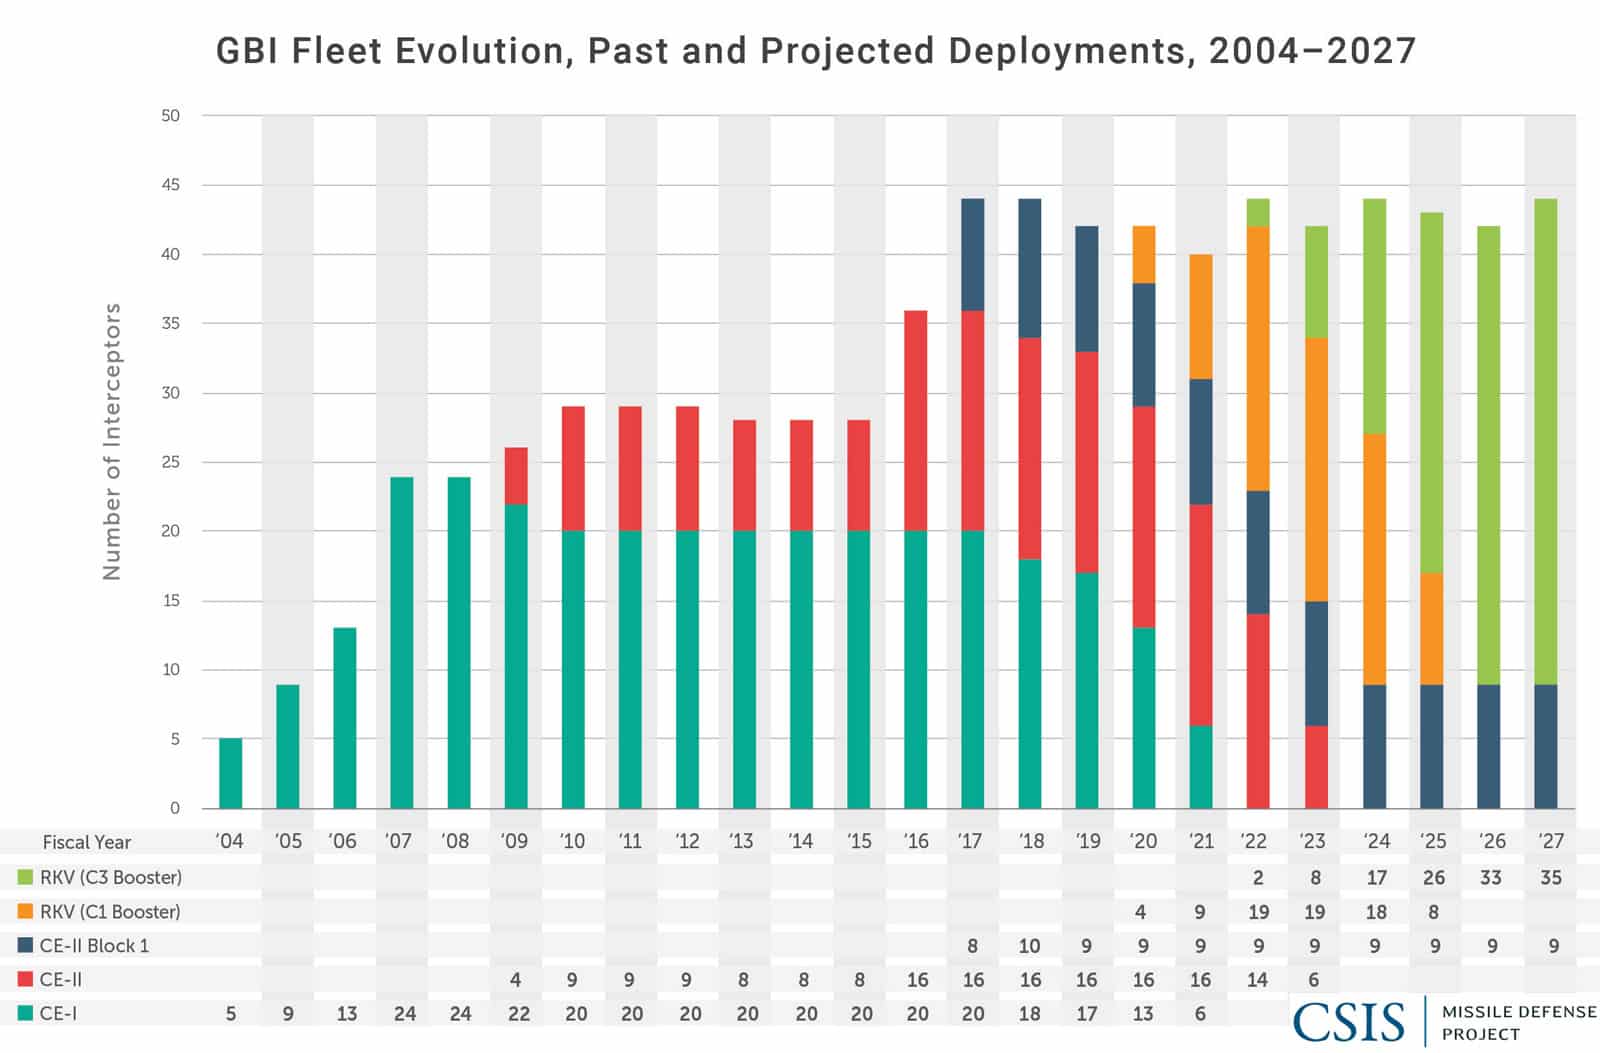 GBI Fleet Evolution: Past and Projected Deployments, 2004-2027